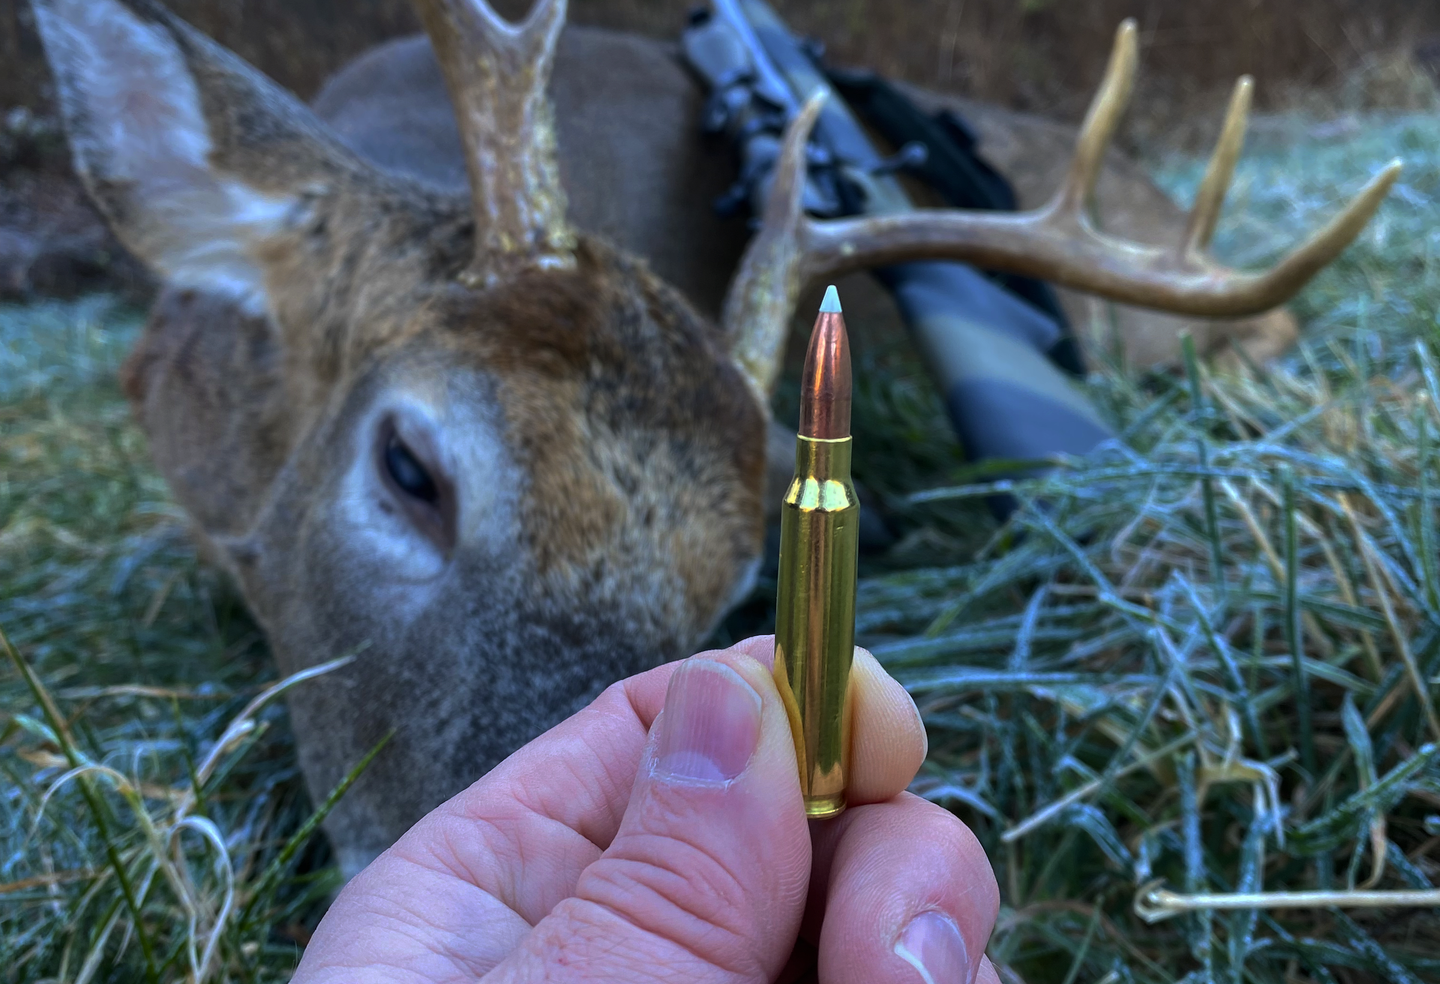 Holding a rifle cartridge in front of a dead deer.